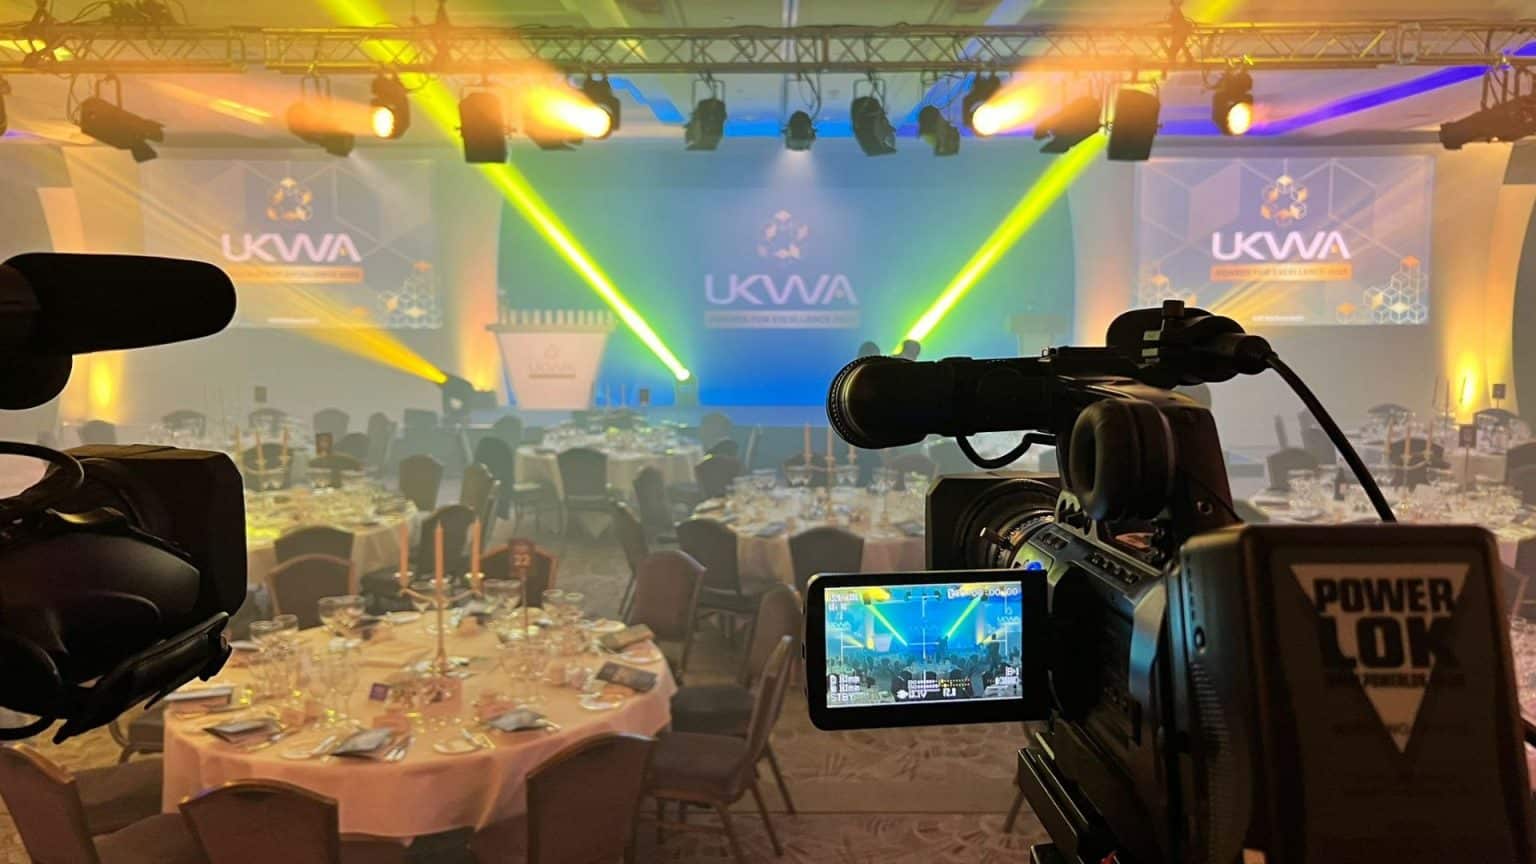 Behind the scenes camera shot of room set up for awards event.